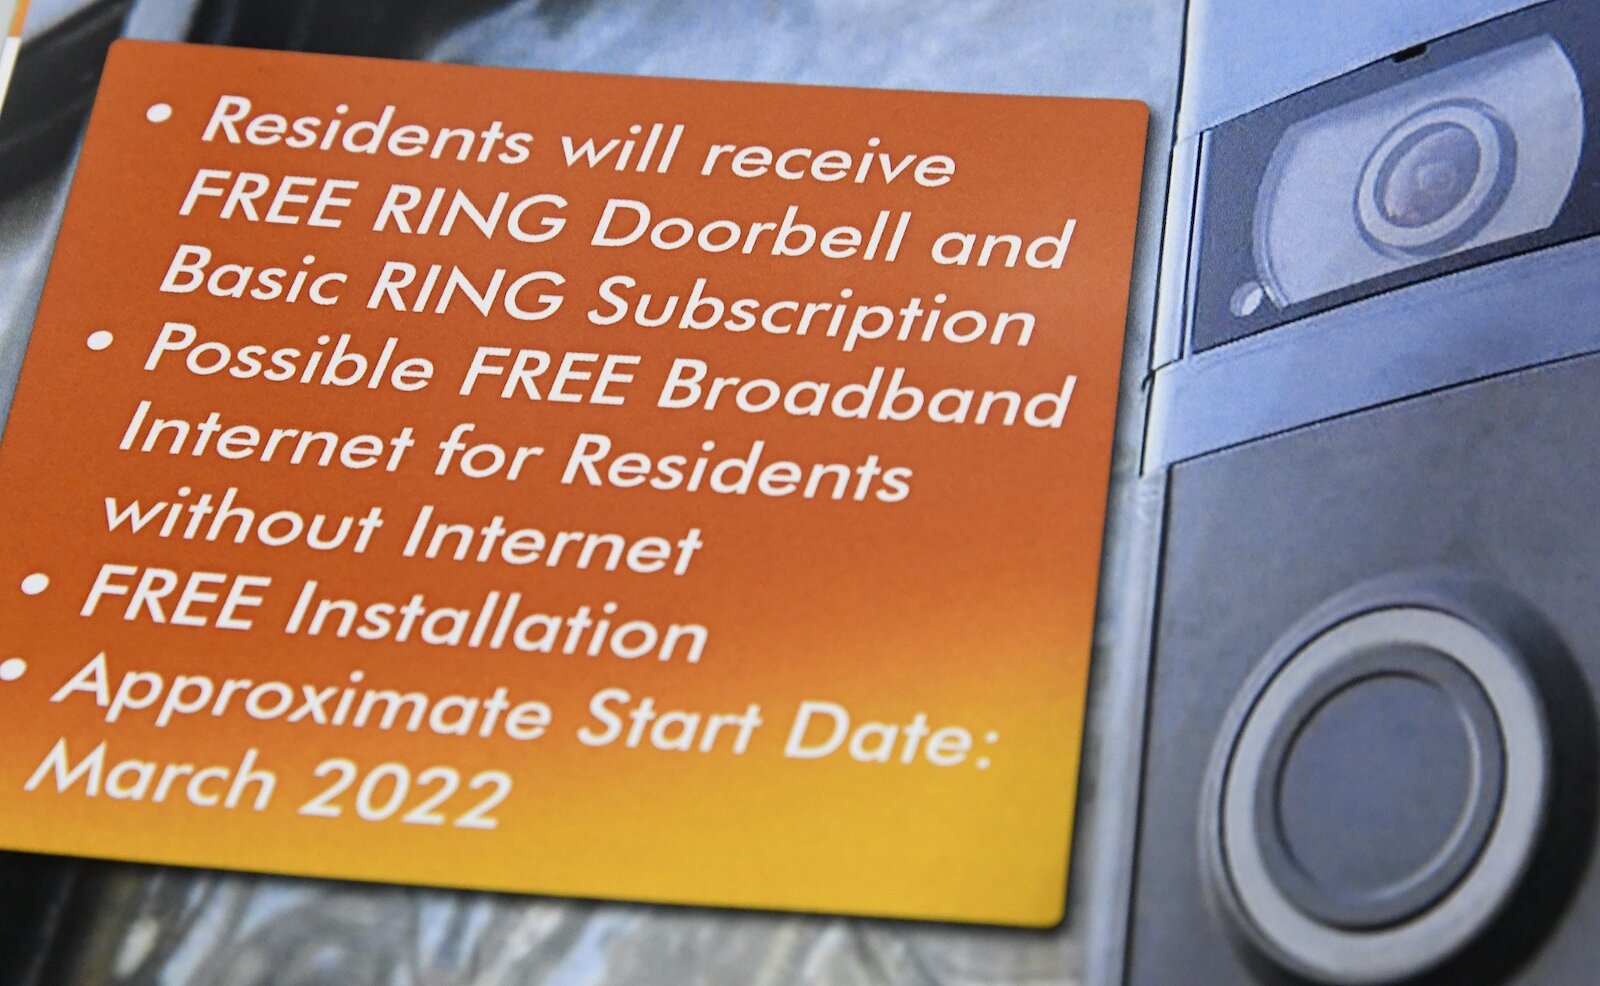 The back cover of the brochure describing the Rise smart doorbell and community safety.